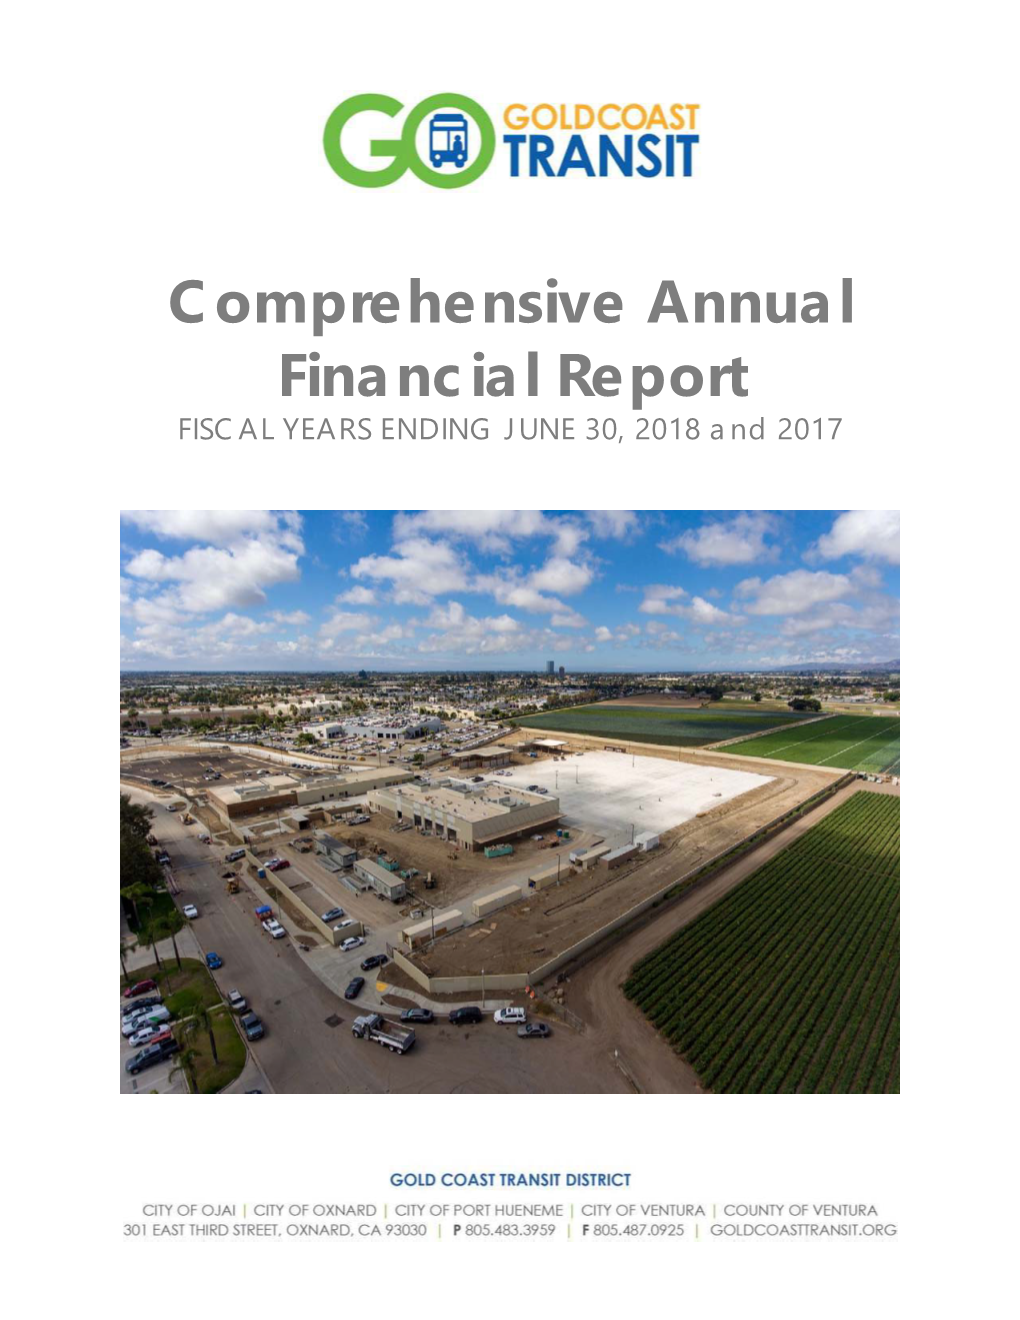 Comprehensive Annual Financial Report FISCAL YEARS ENDING JUNE 30, 2018 and 2017